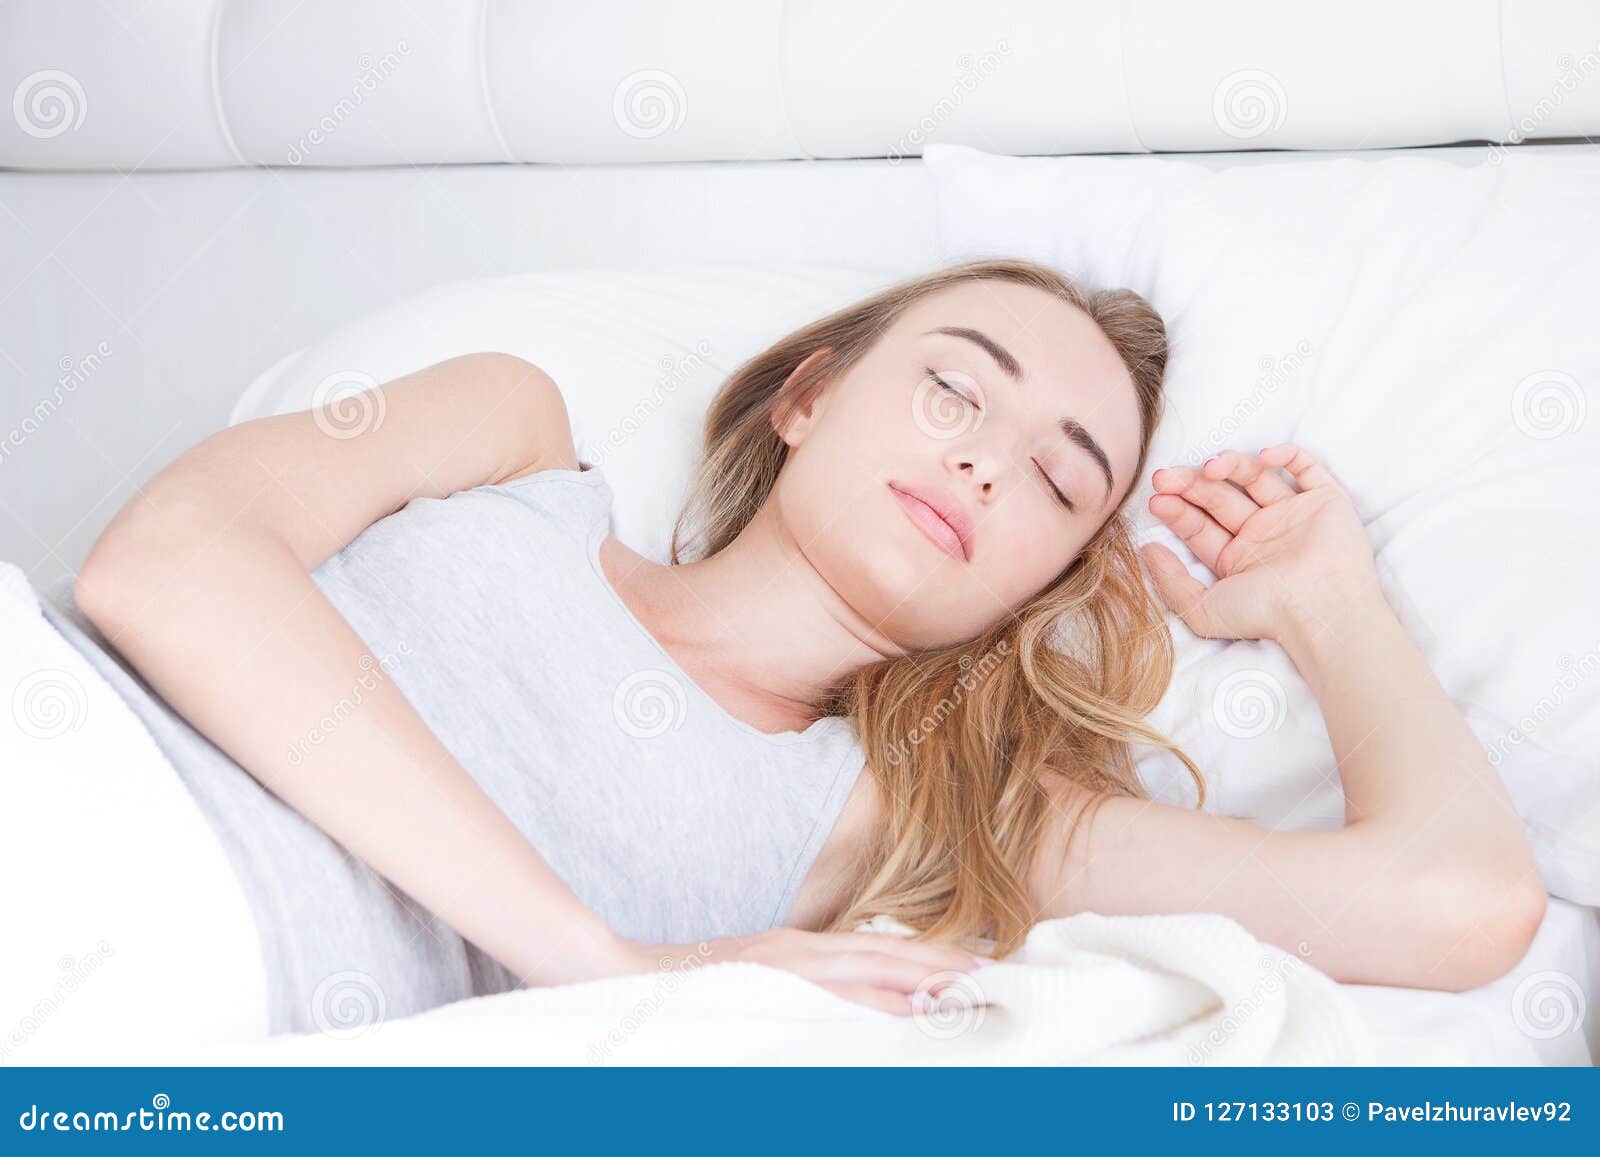 Sleep Young Woman Sleeping In Bed Portrait Of Beautiful Female Resting On Comfortable Bed With